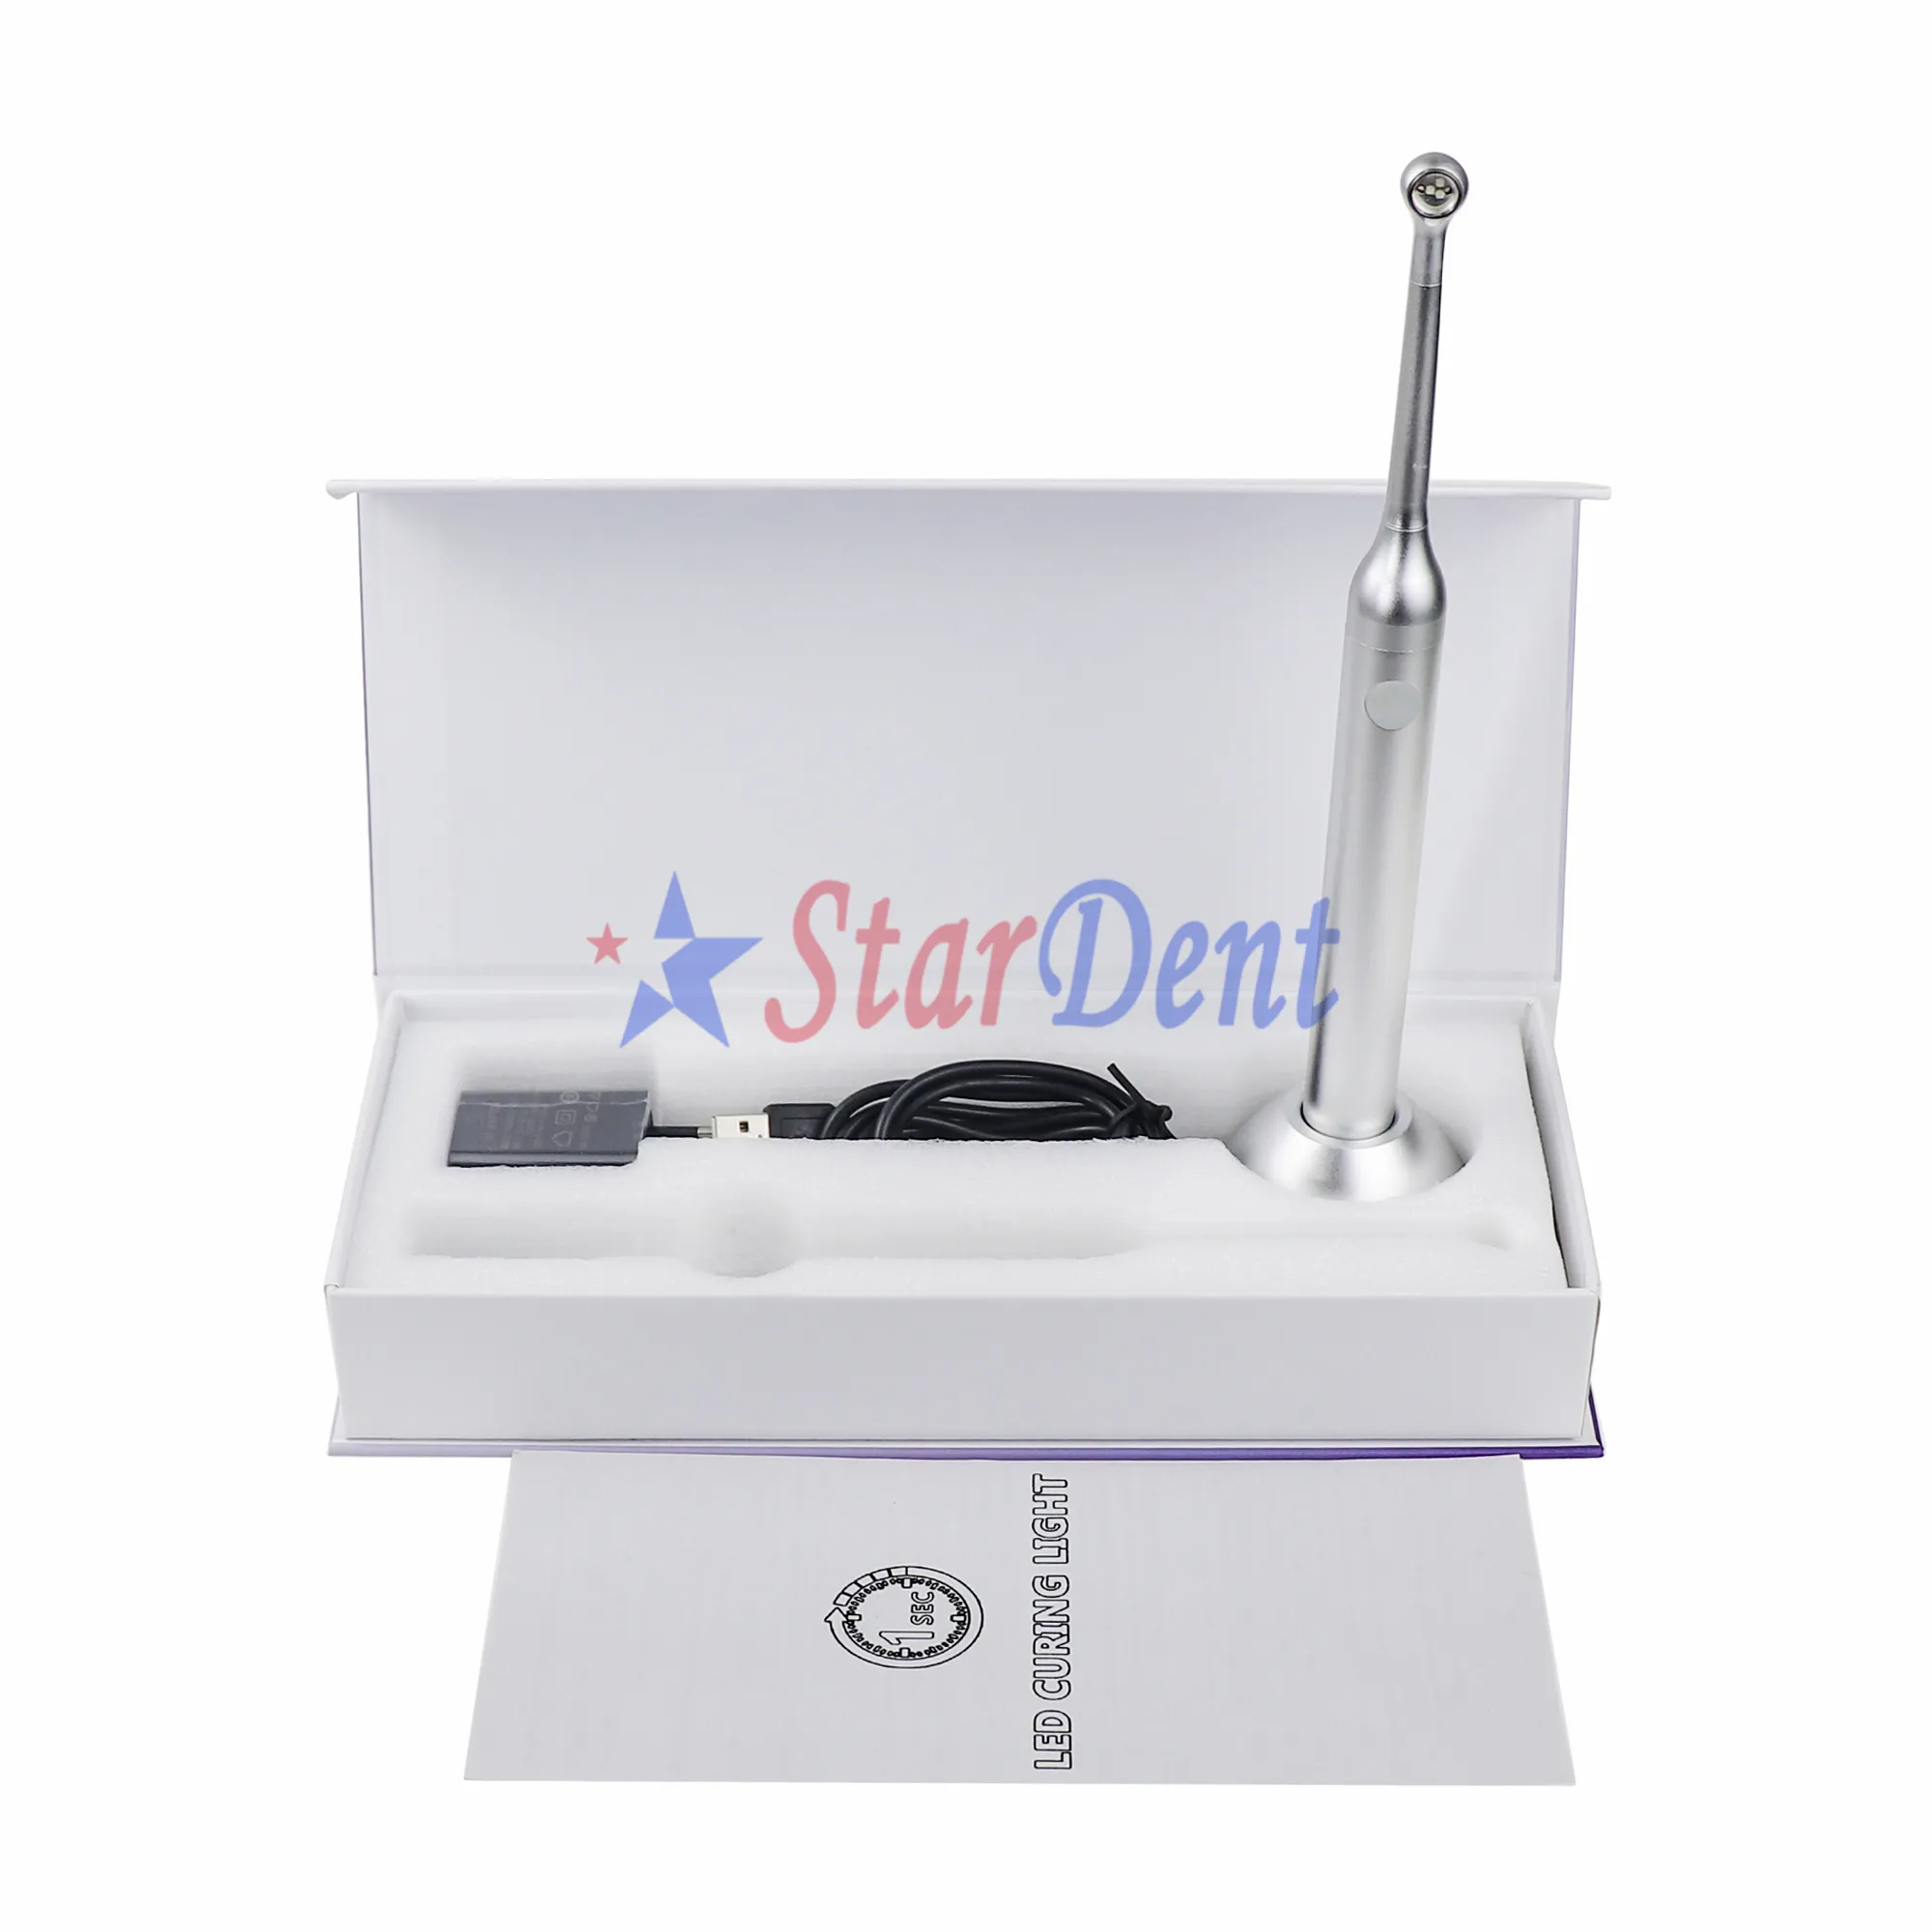 Dental LED Curing Light Dental Product 1 Second LED Curing Light Aluminum Body for Composite Material